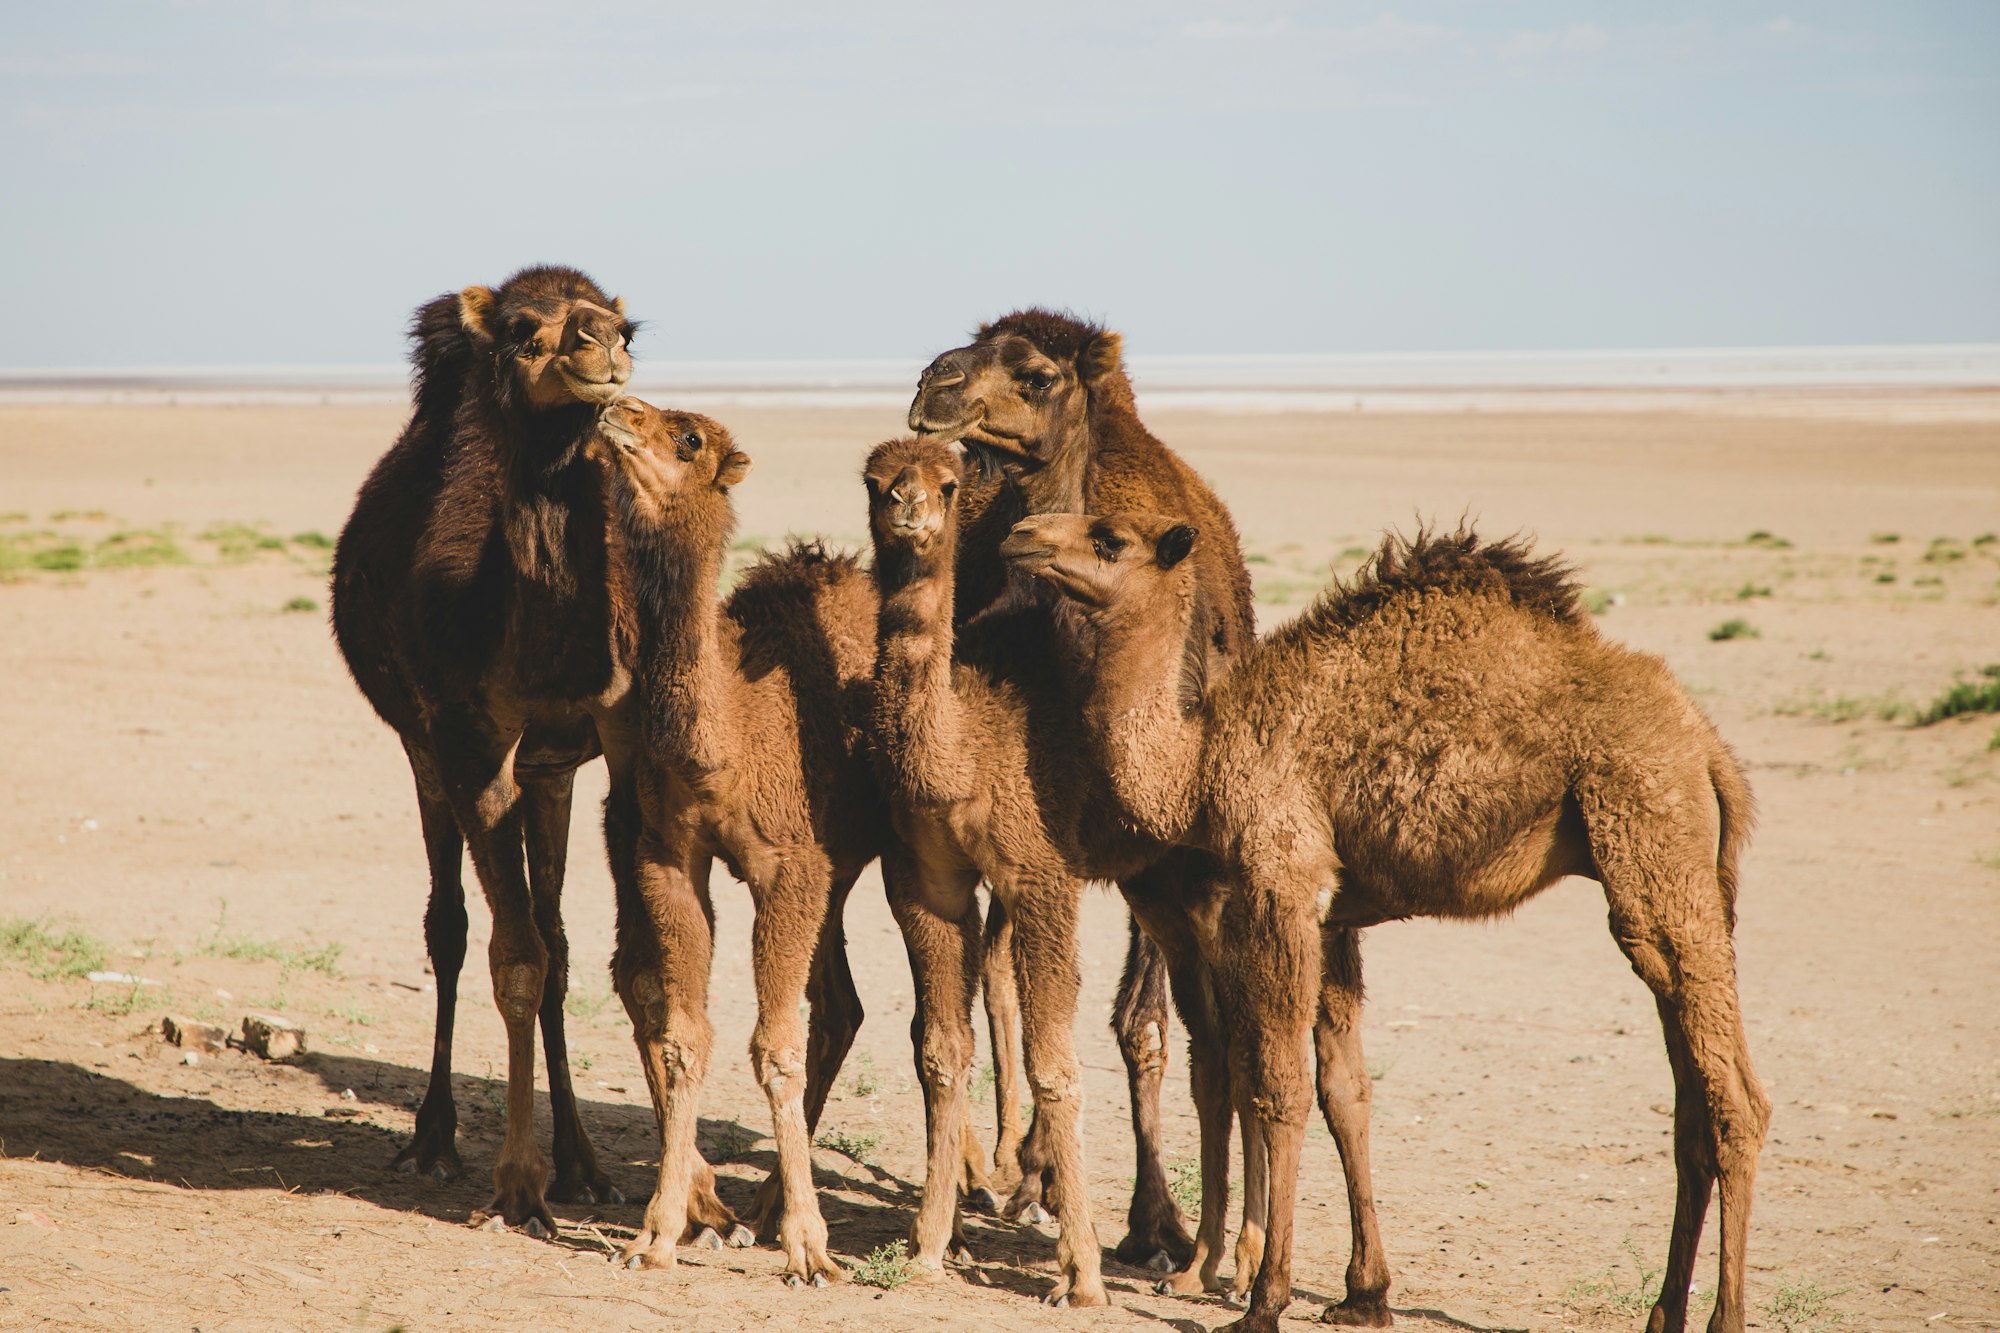 I stayed at Maranjab Caravanserai for a night to shoot the stars.
The camel family appeared the next morning.
They ate breakfast and drank water around the caravanserai.